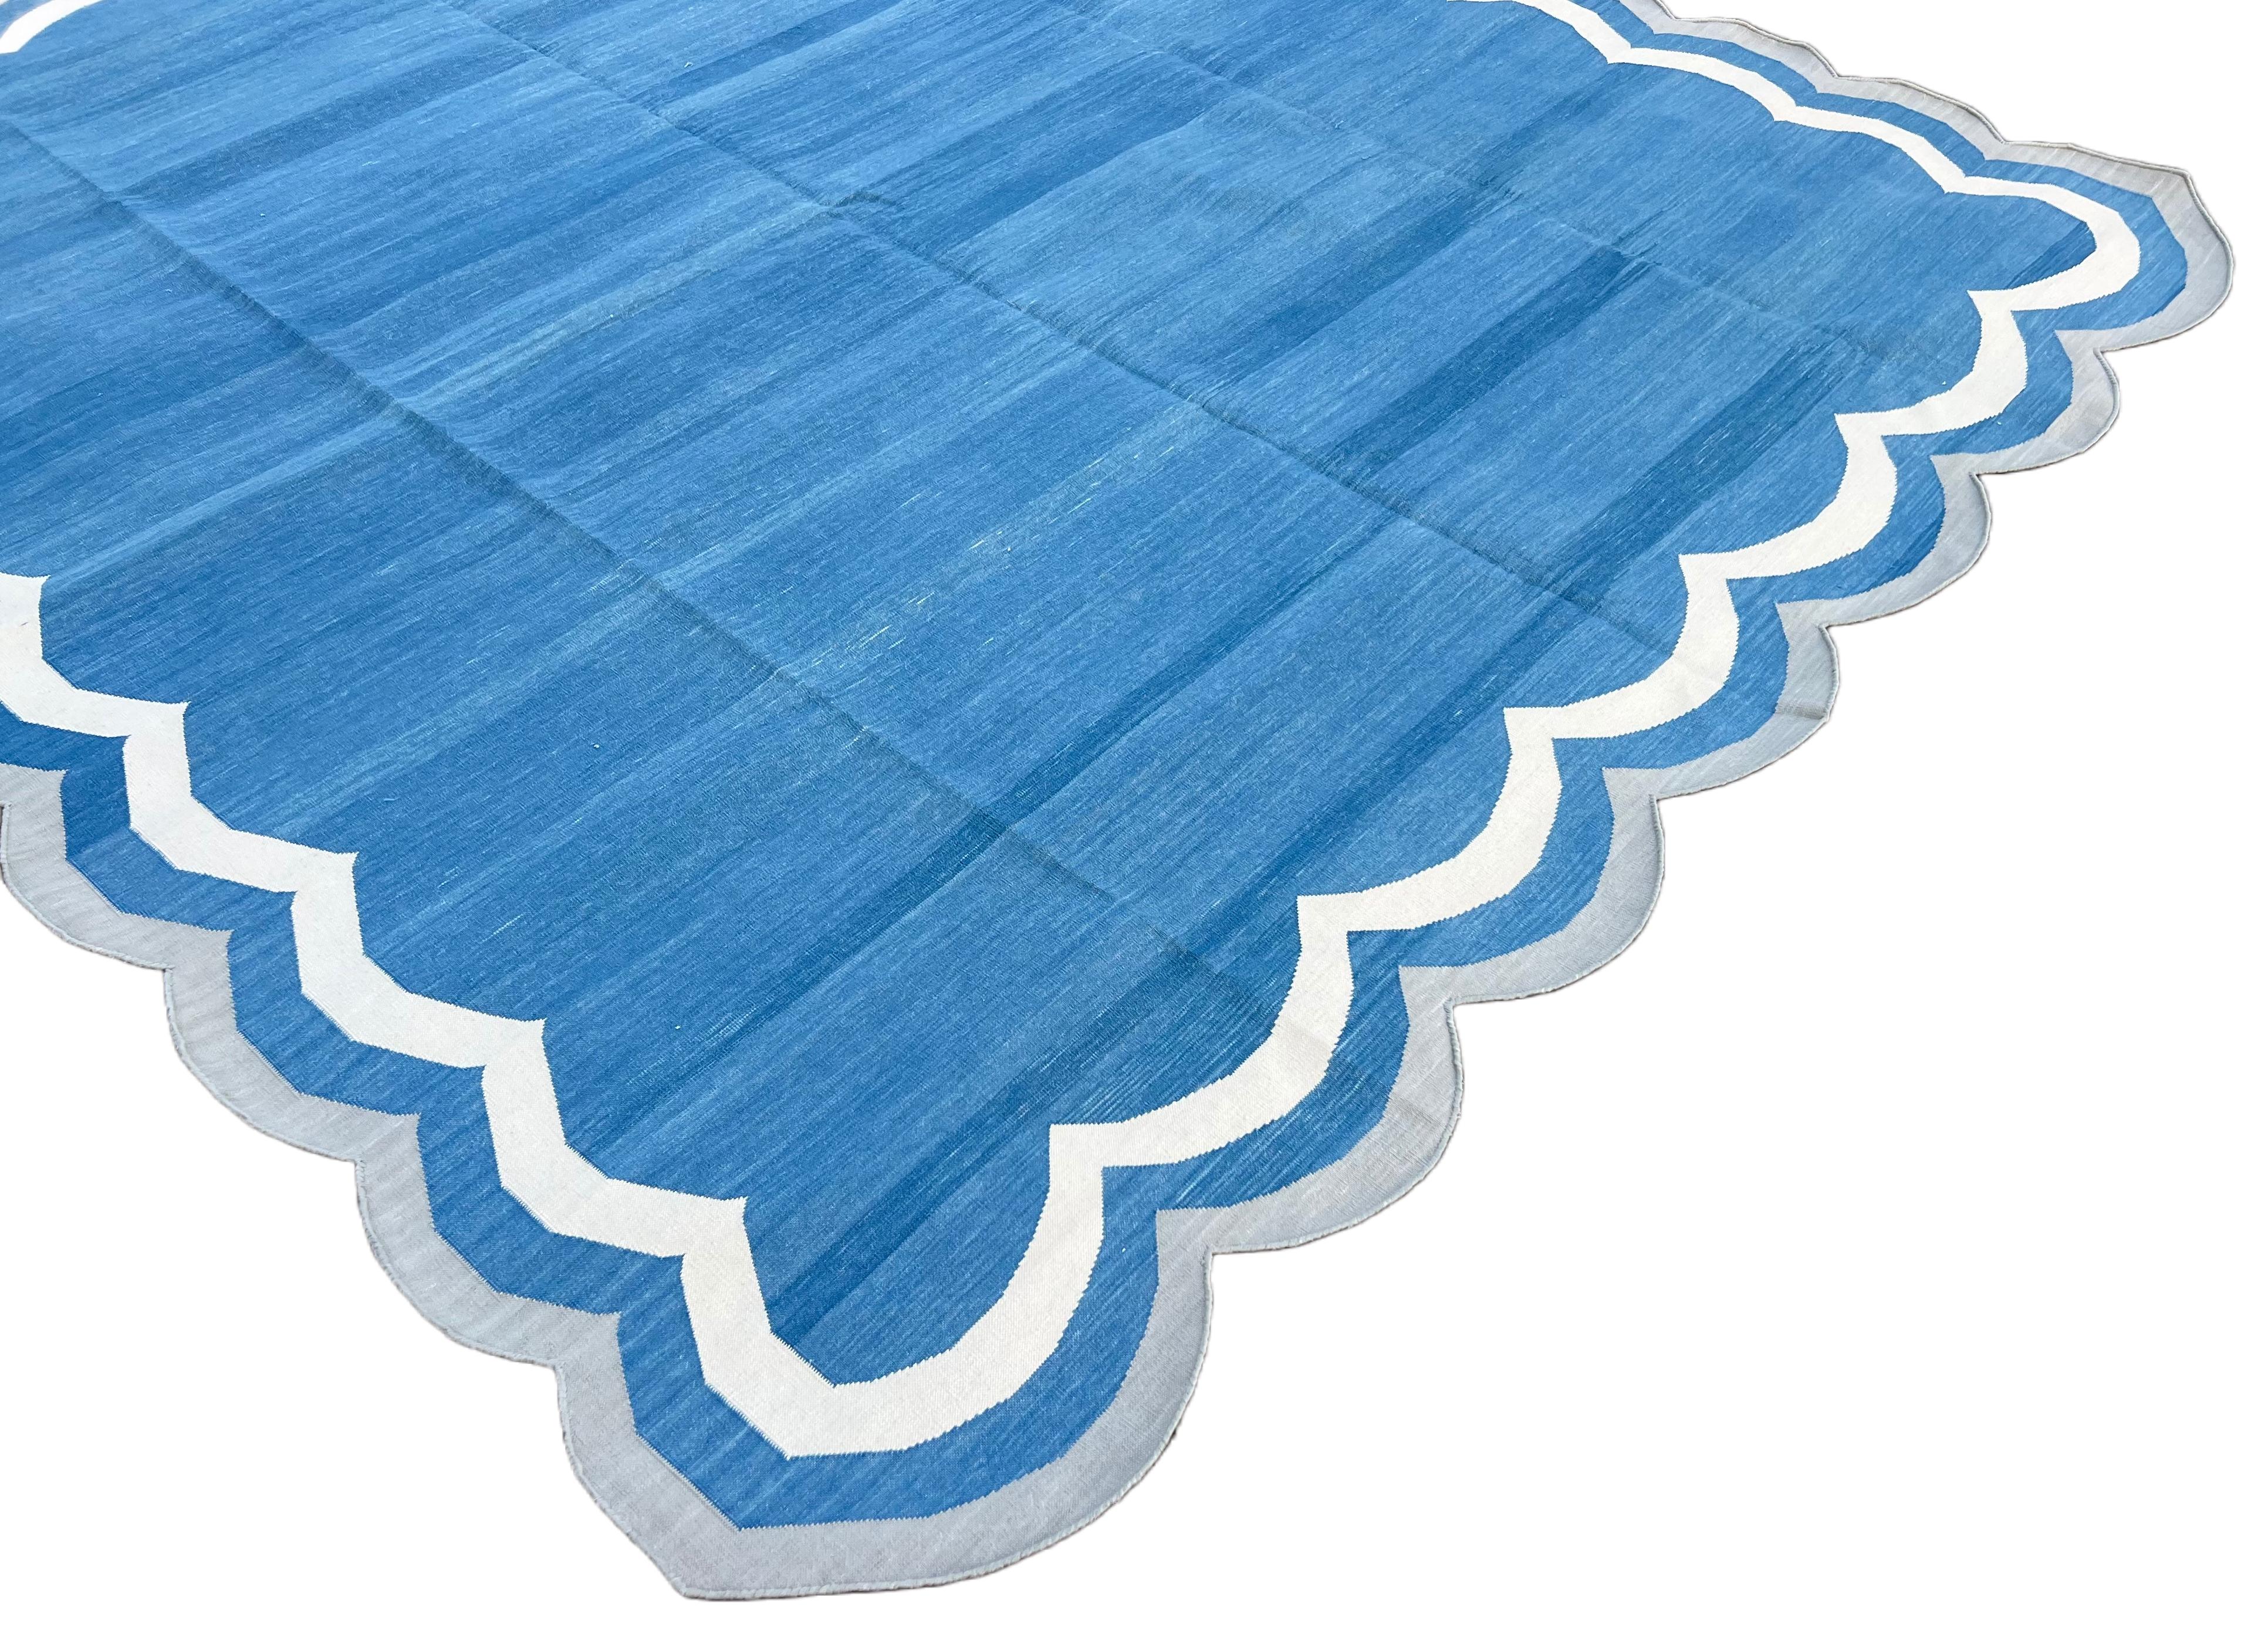 Mid-Century Modern Handmade Cotton Area Flat Weave Rug, 8x10 Blue And Grey Scalloped Stripe Dhurrie For Sale